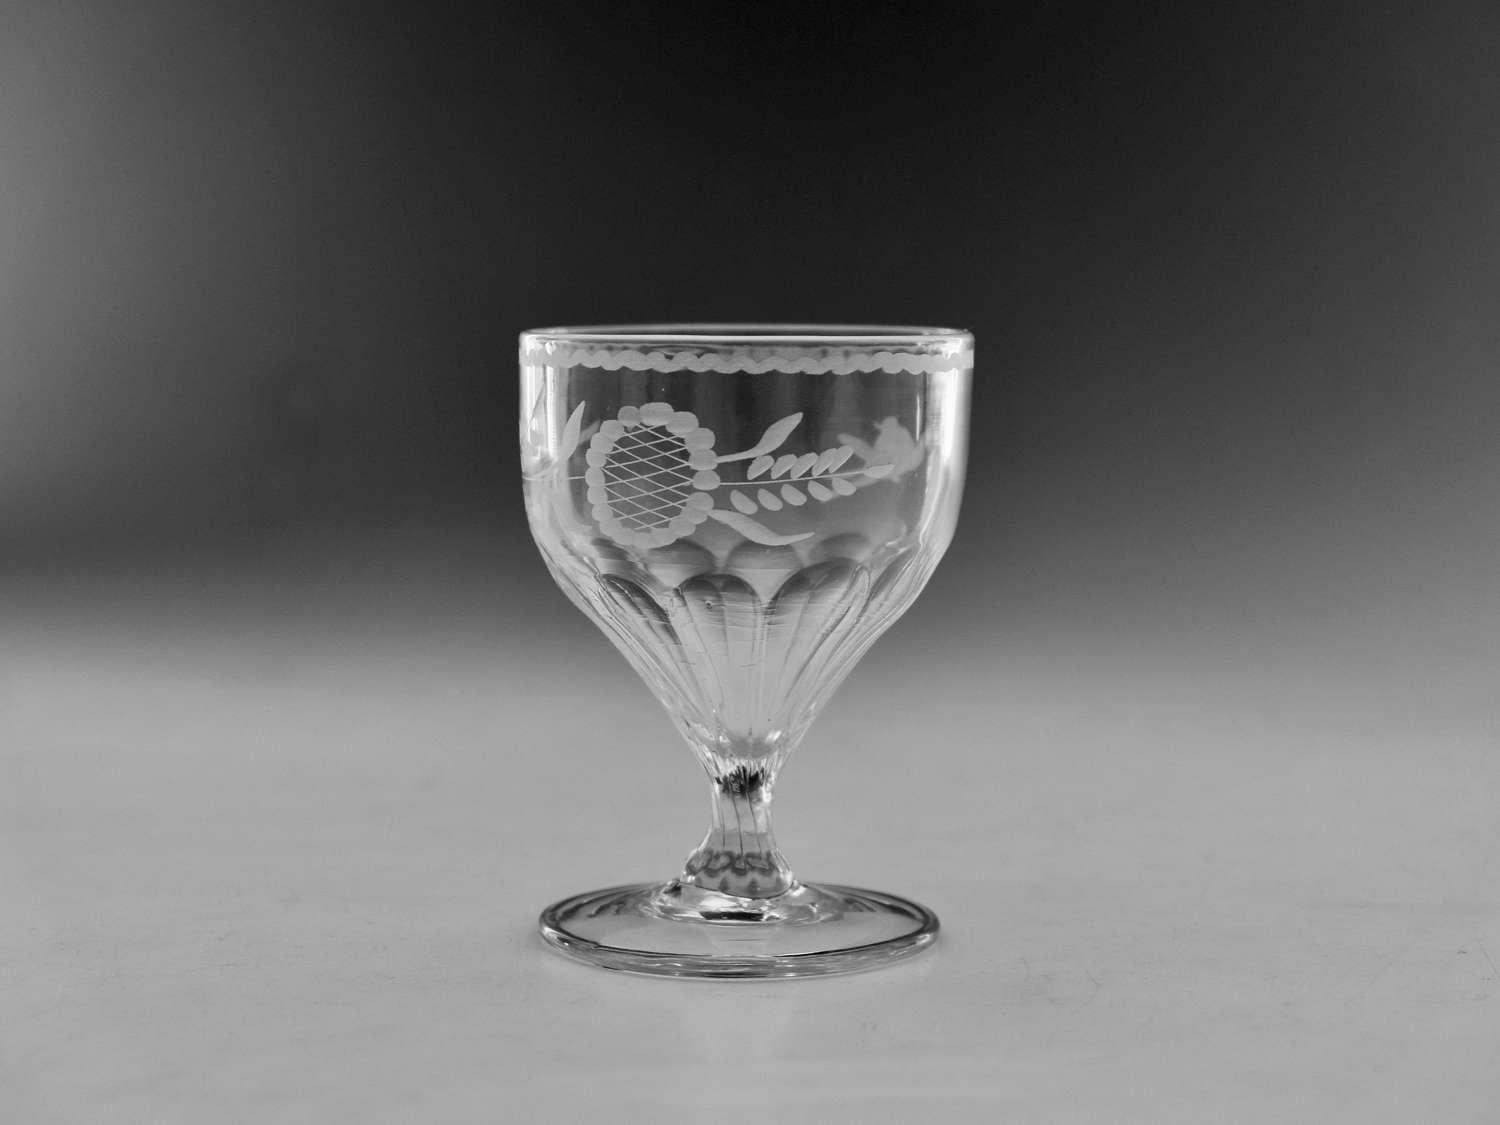 Antique glass - engraved rummer English c1800